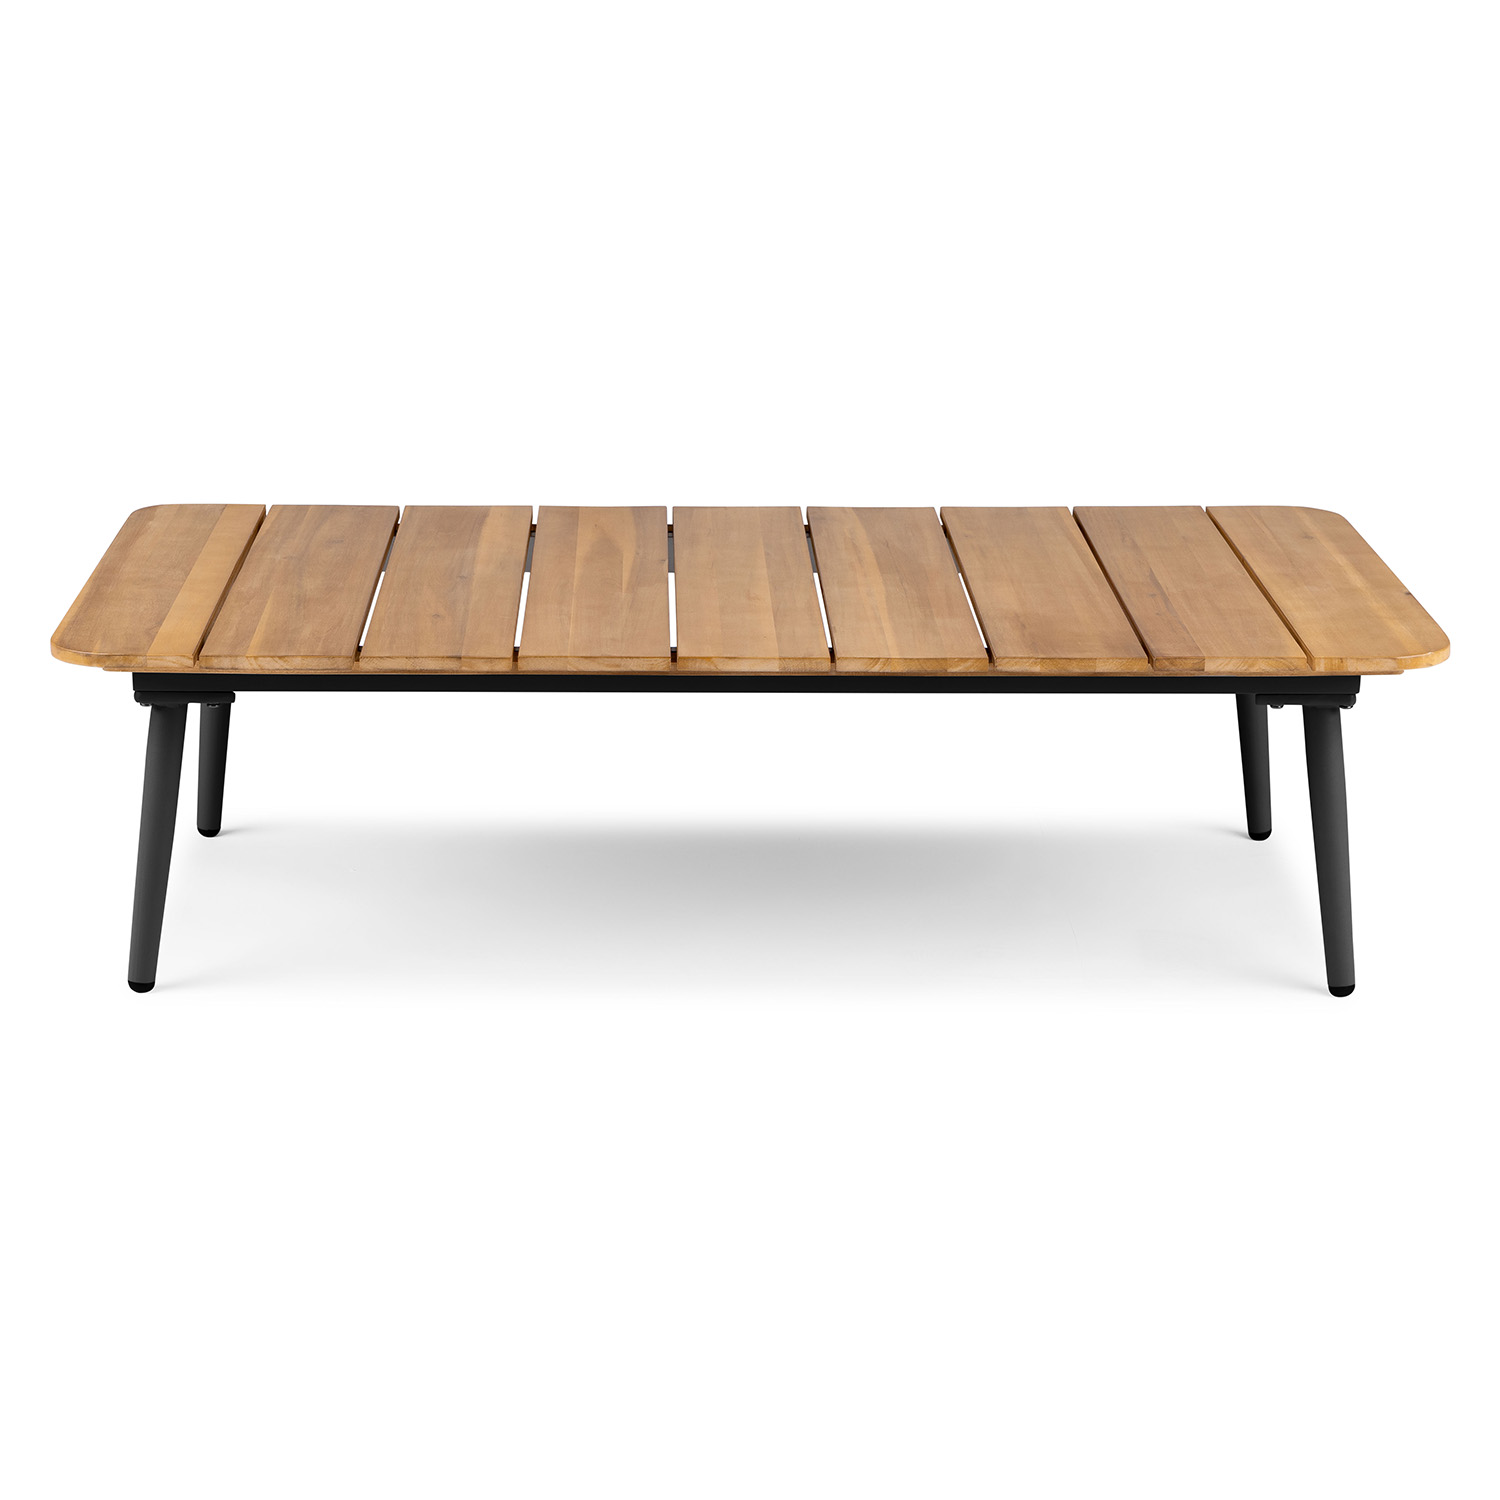 Slate Gray Outdoor Wooden Coffee Table | Latta | Article